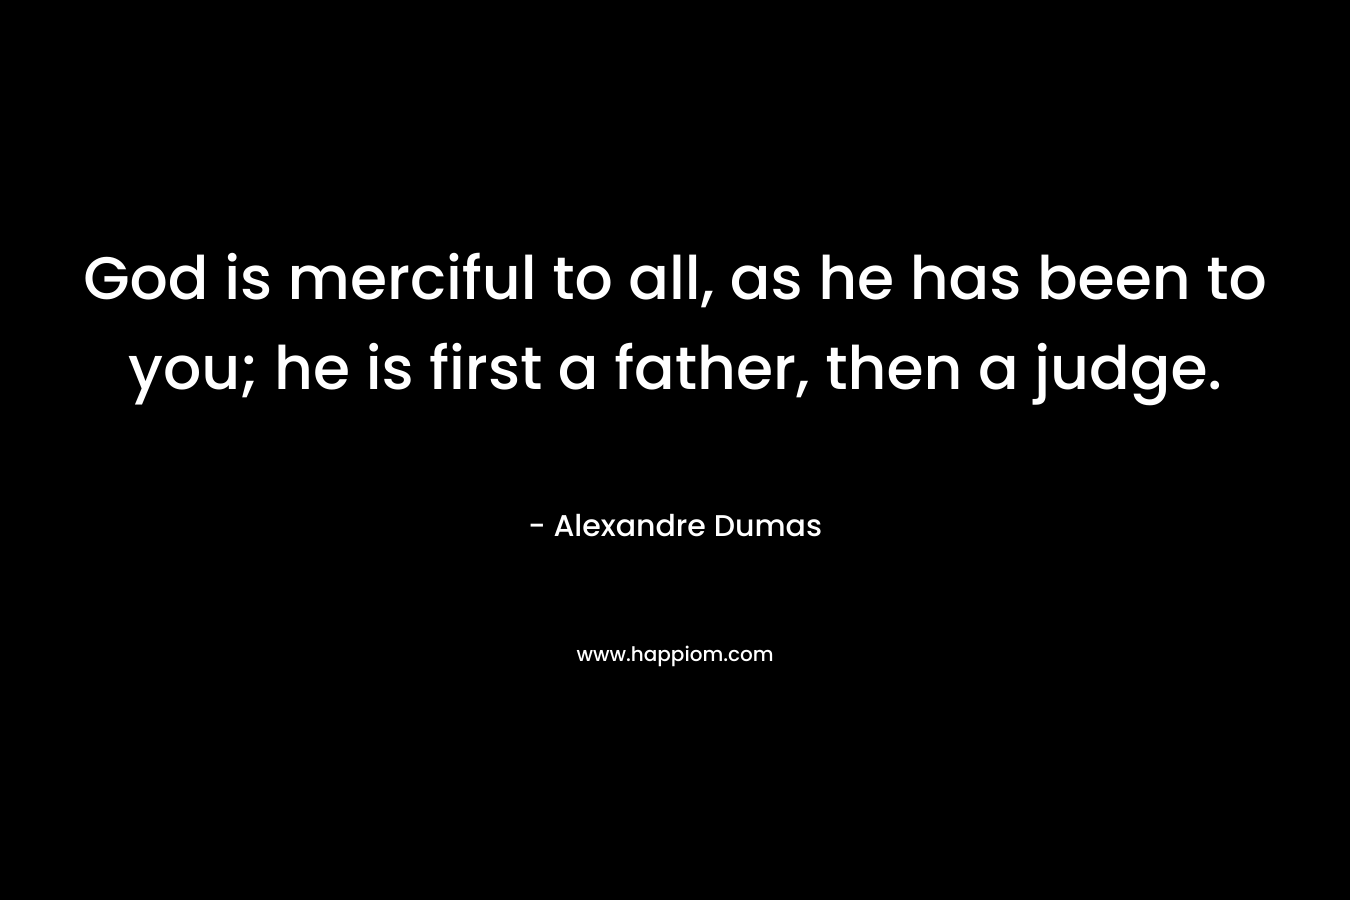 God is merciful to all, as he has been to you; he is first a father, then a judge. – Alexandre Dumas